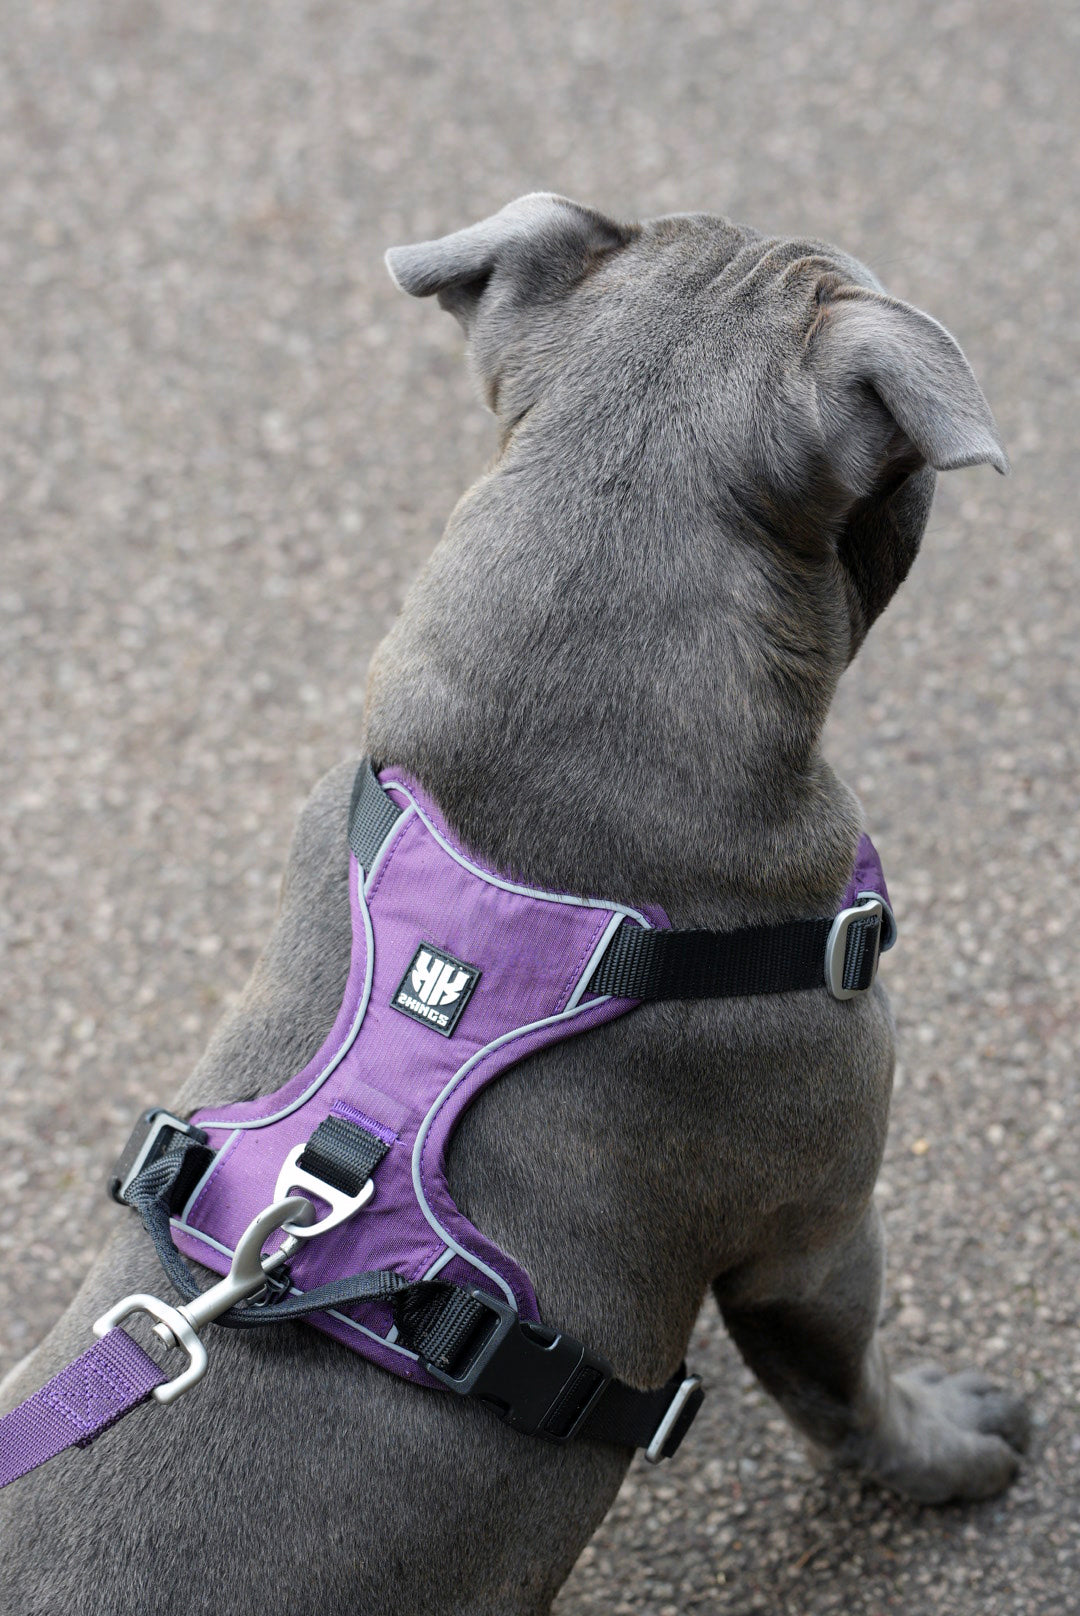 Back view of a dog wearing a purple comfort harness, showcasing the harness's adjustable straps and ergonomic design for a secure and comfortable fit.